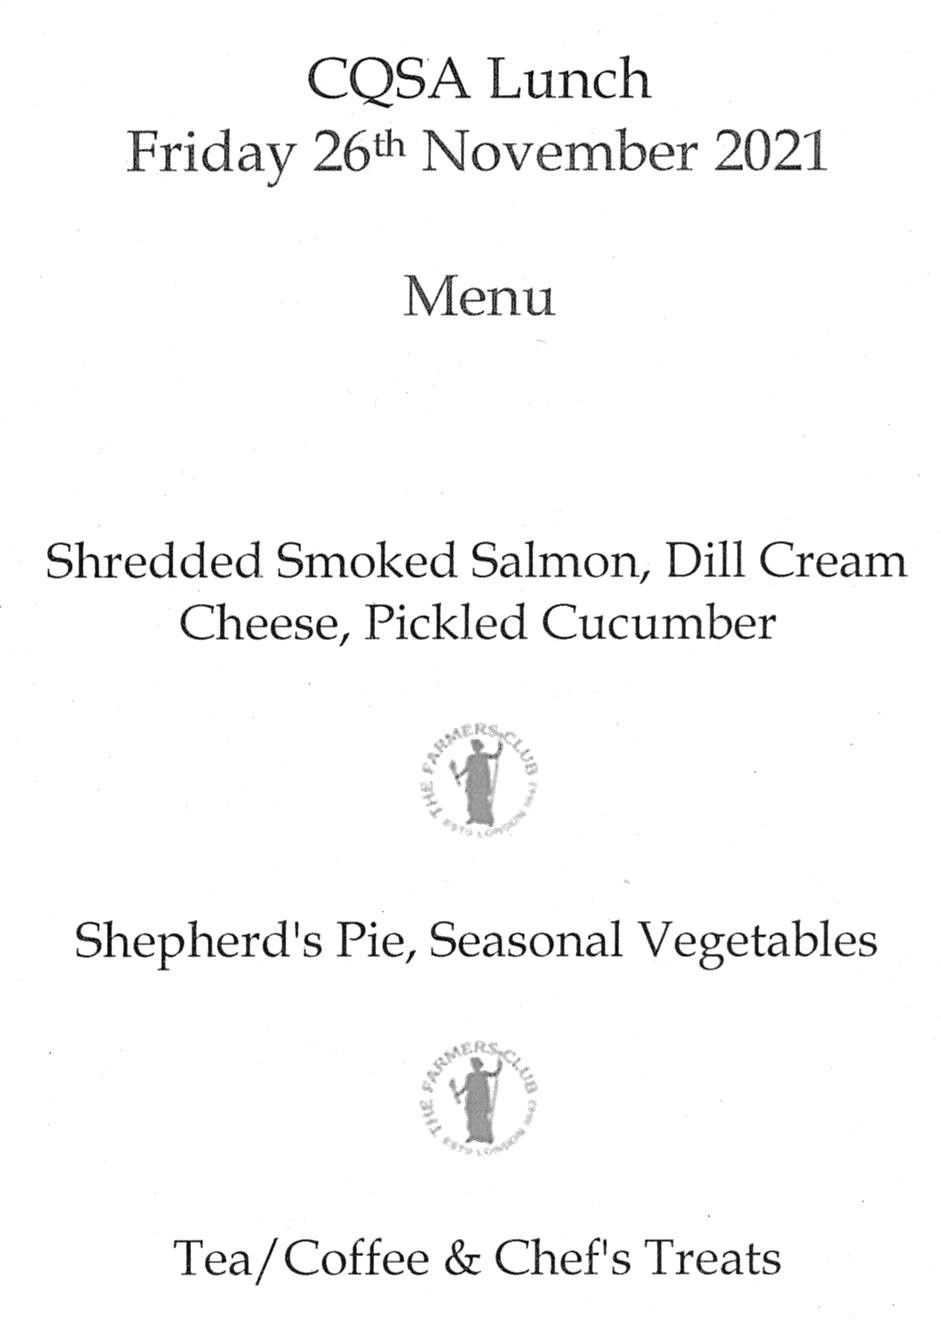 Typical Lunch Menu